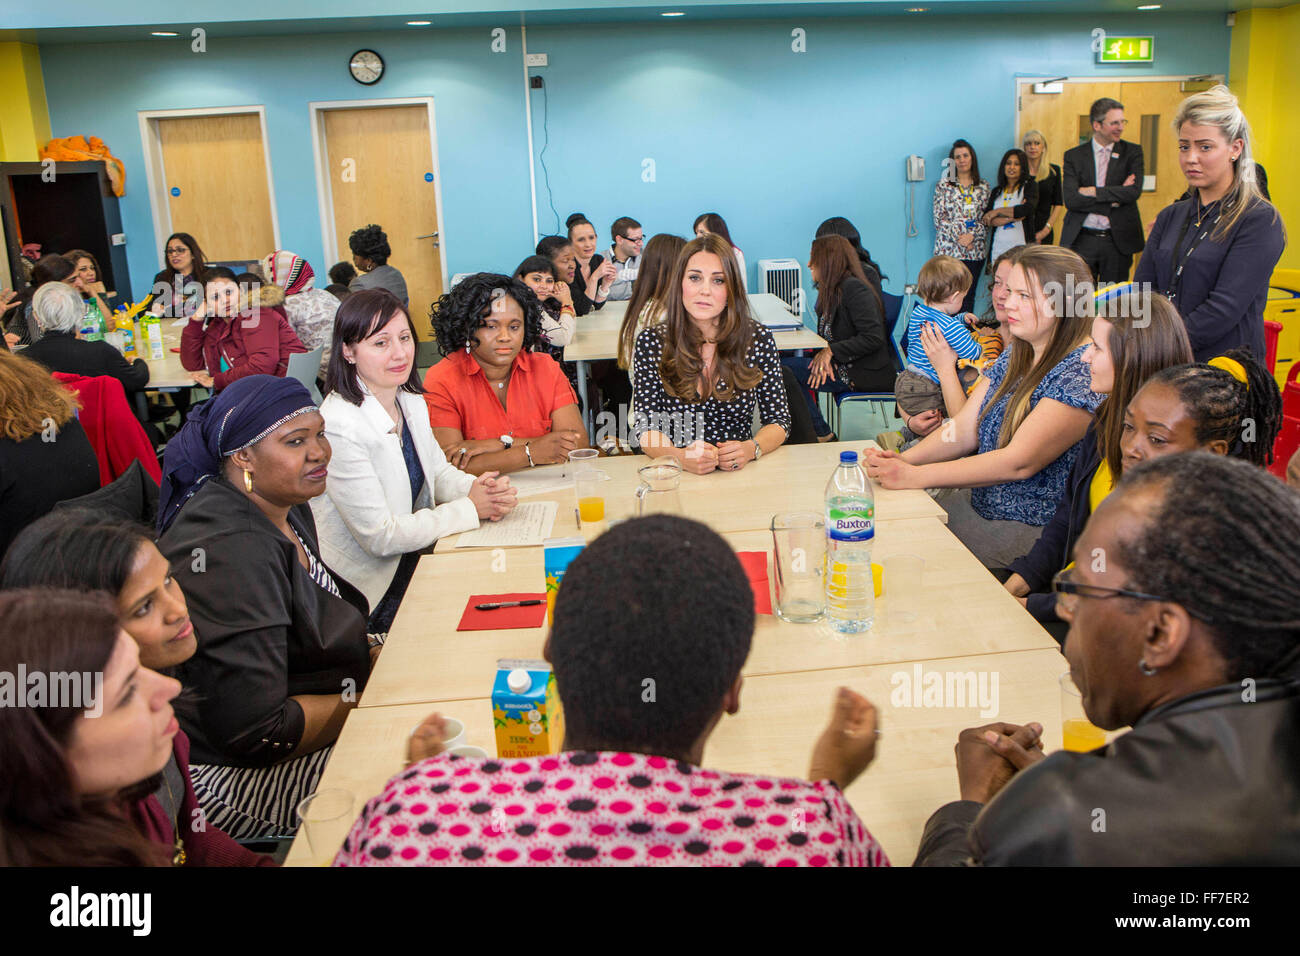 Her Royal Highness The Duchess of Cambridge chatting to parents and staff at Brookhill Children’s Centre.  A Home-Start project that offers support to children and families. London, UK. Stock Photo